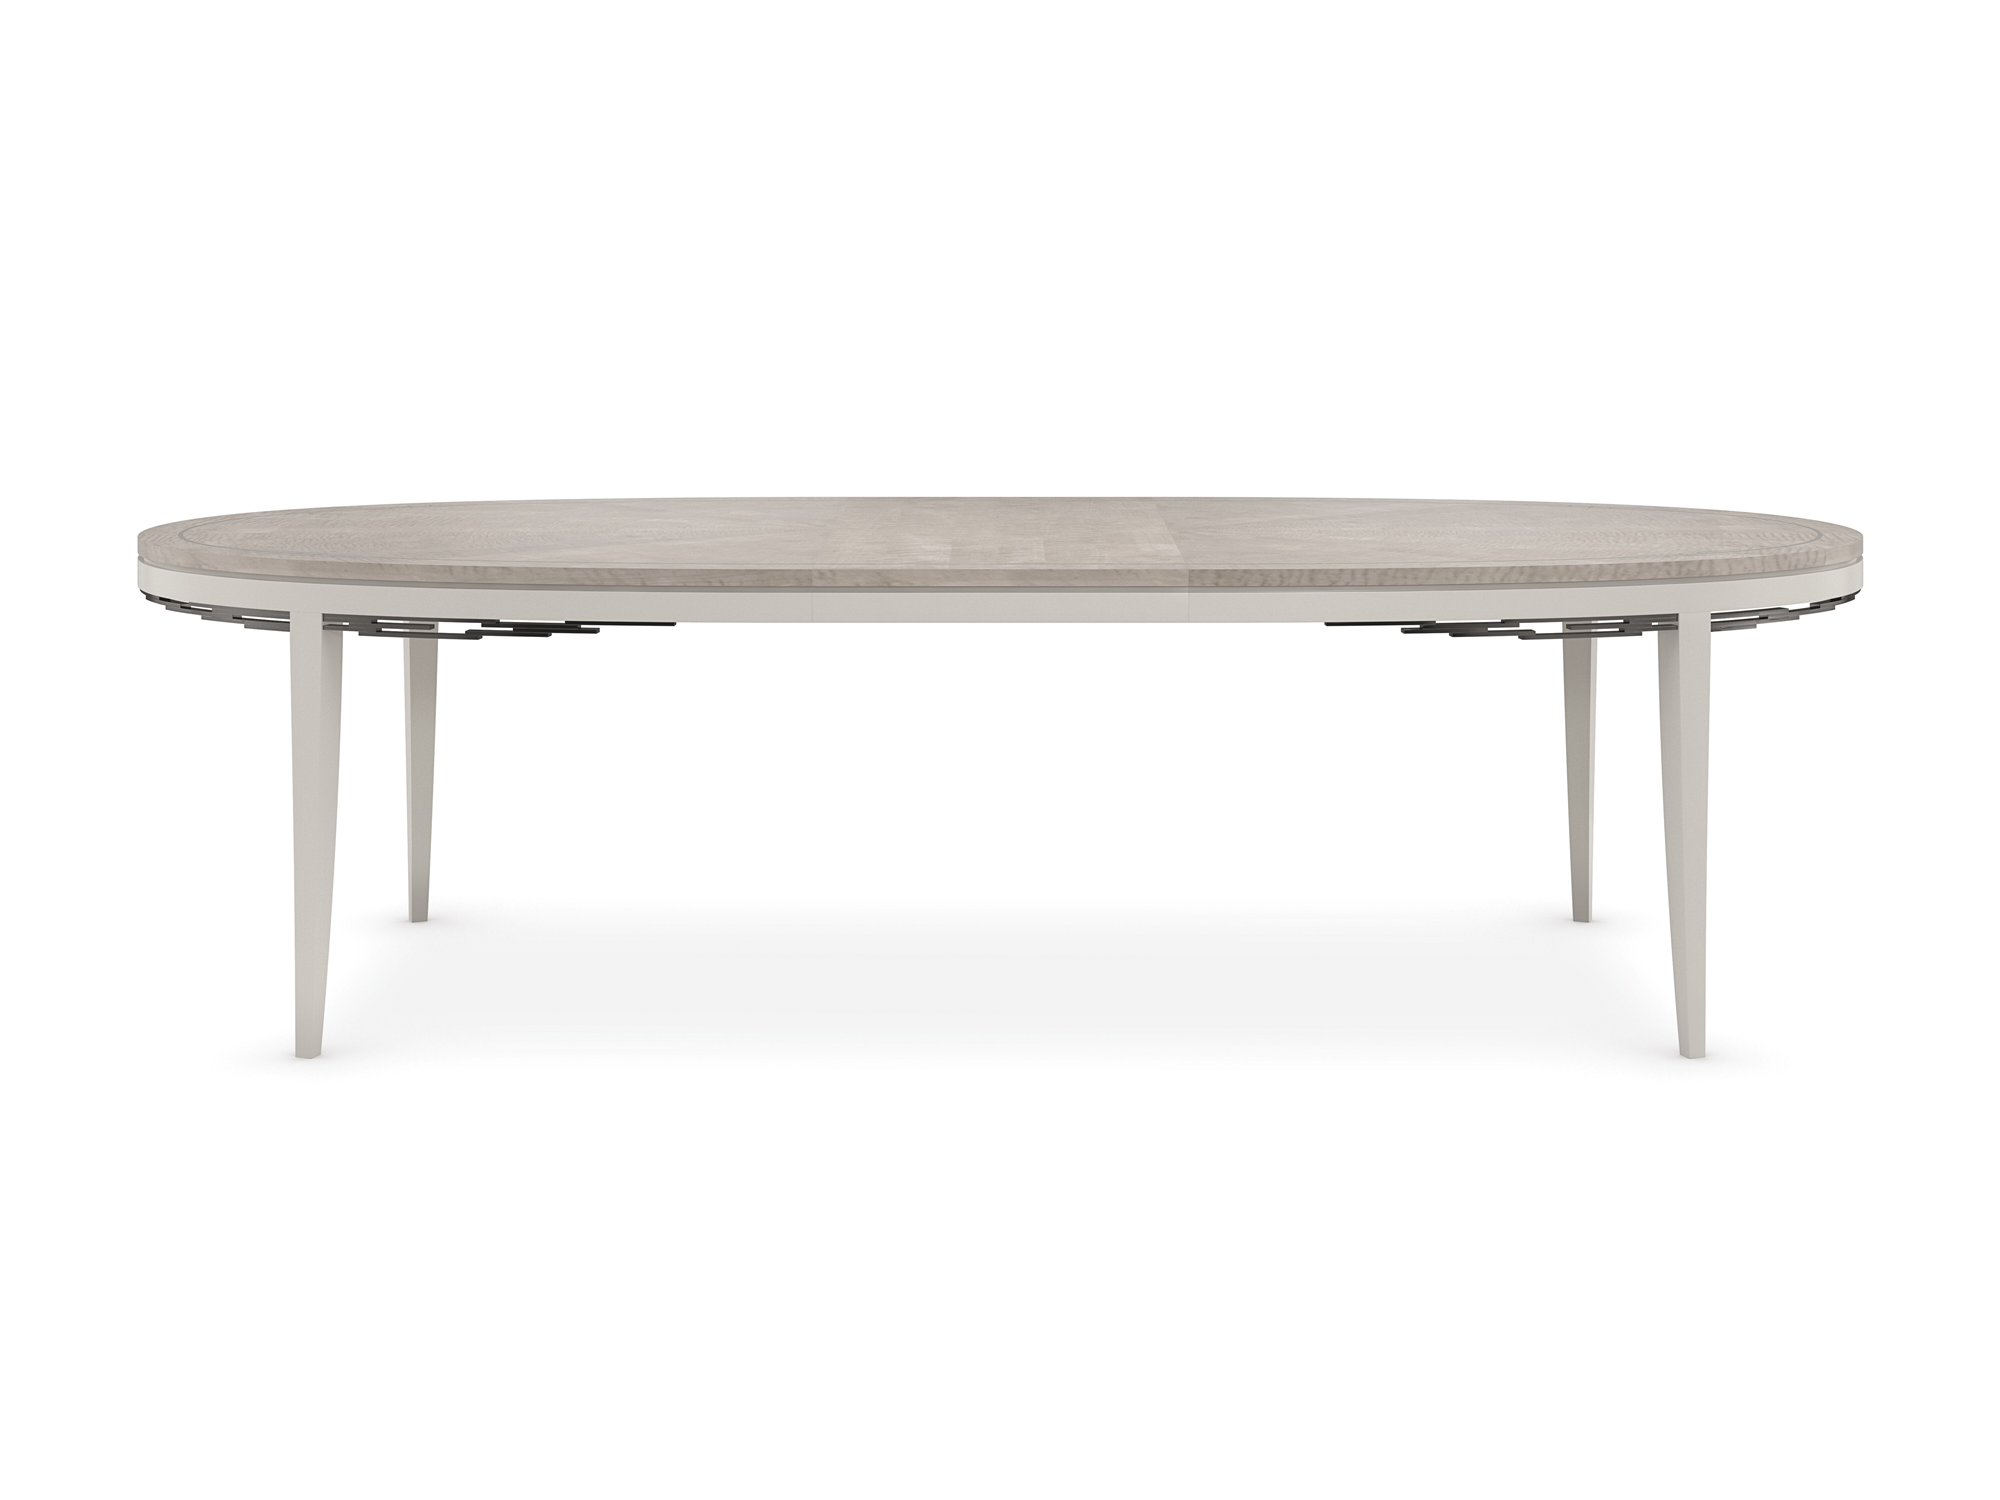 Babs Coronet Dining Table - Euro Living Furniture